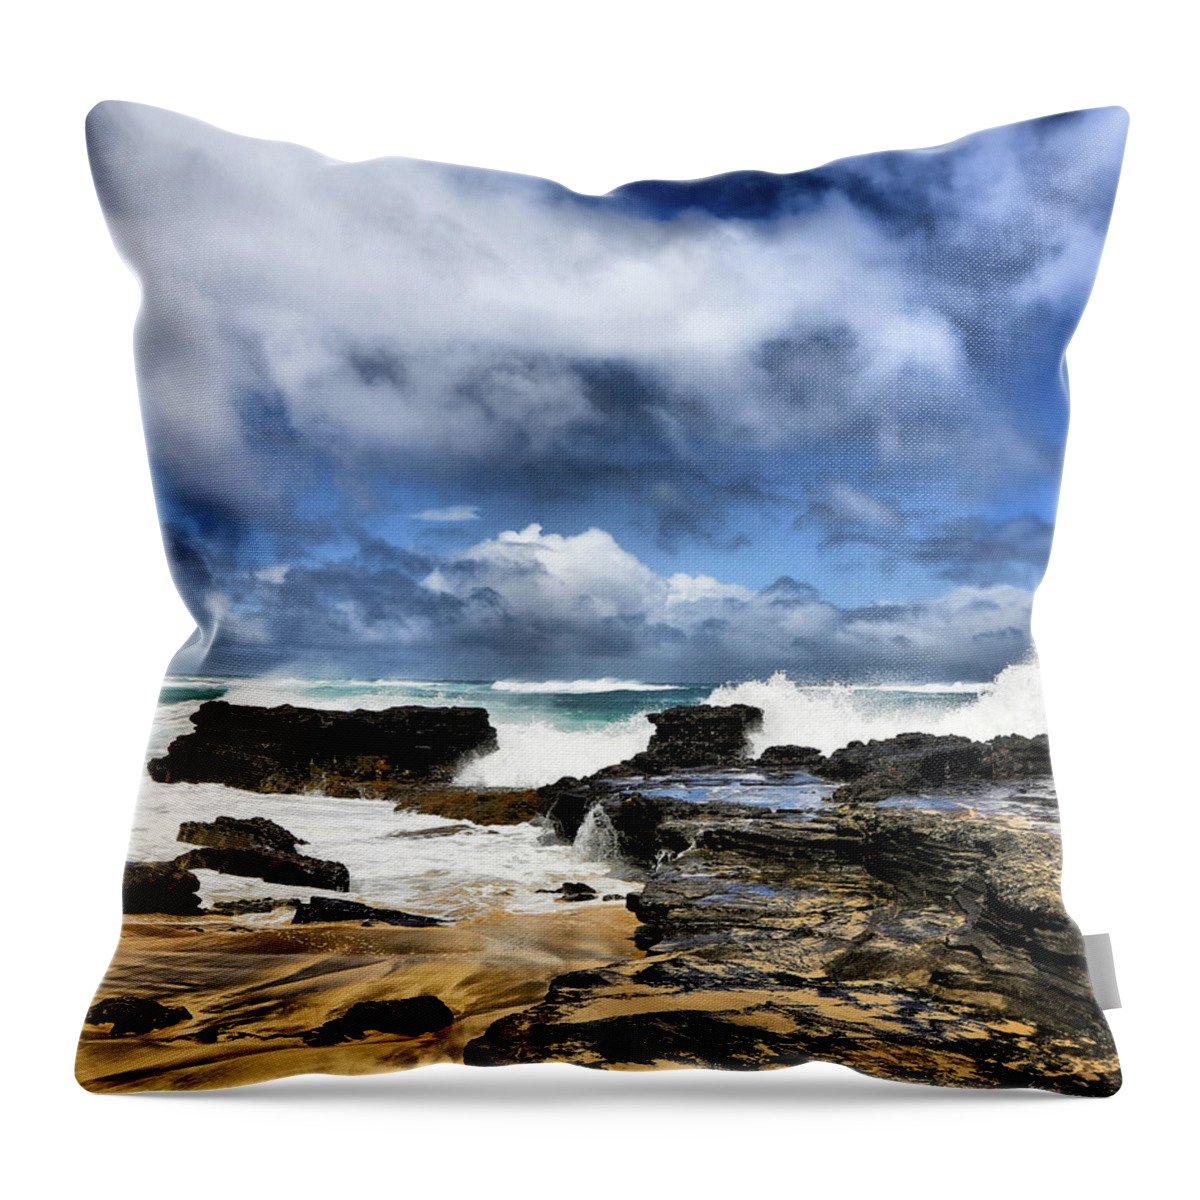 Waves Throw Pillow featuring the photograph Oahu Shoreline by Donald J Gray